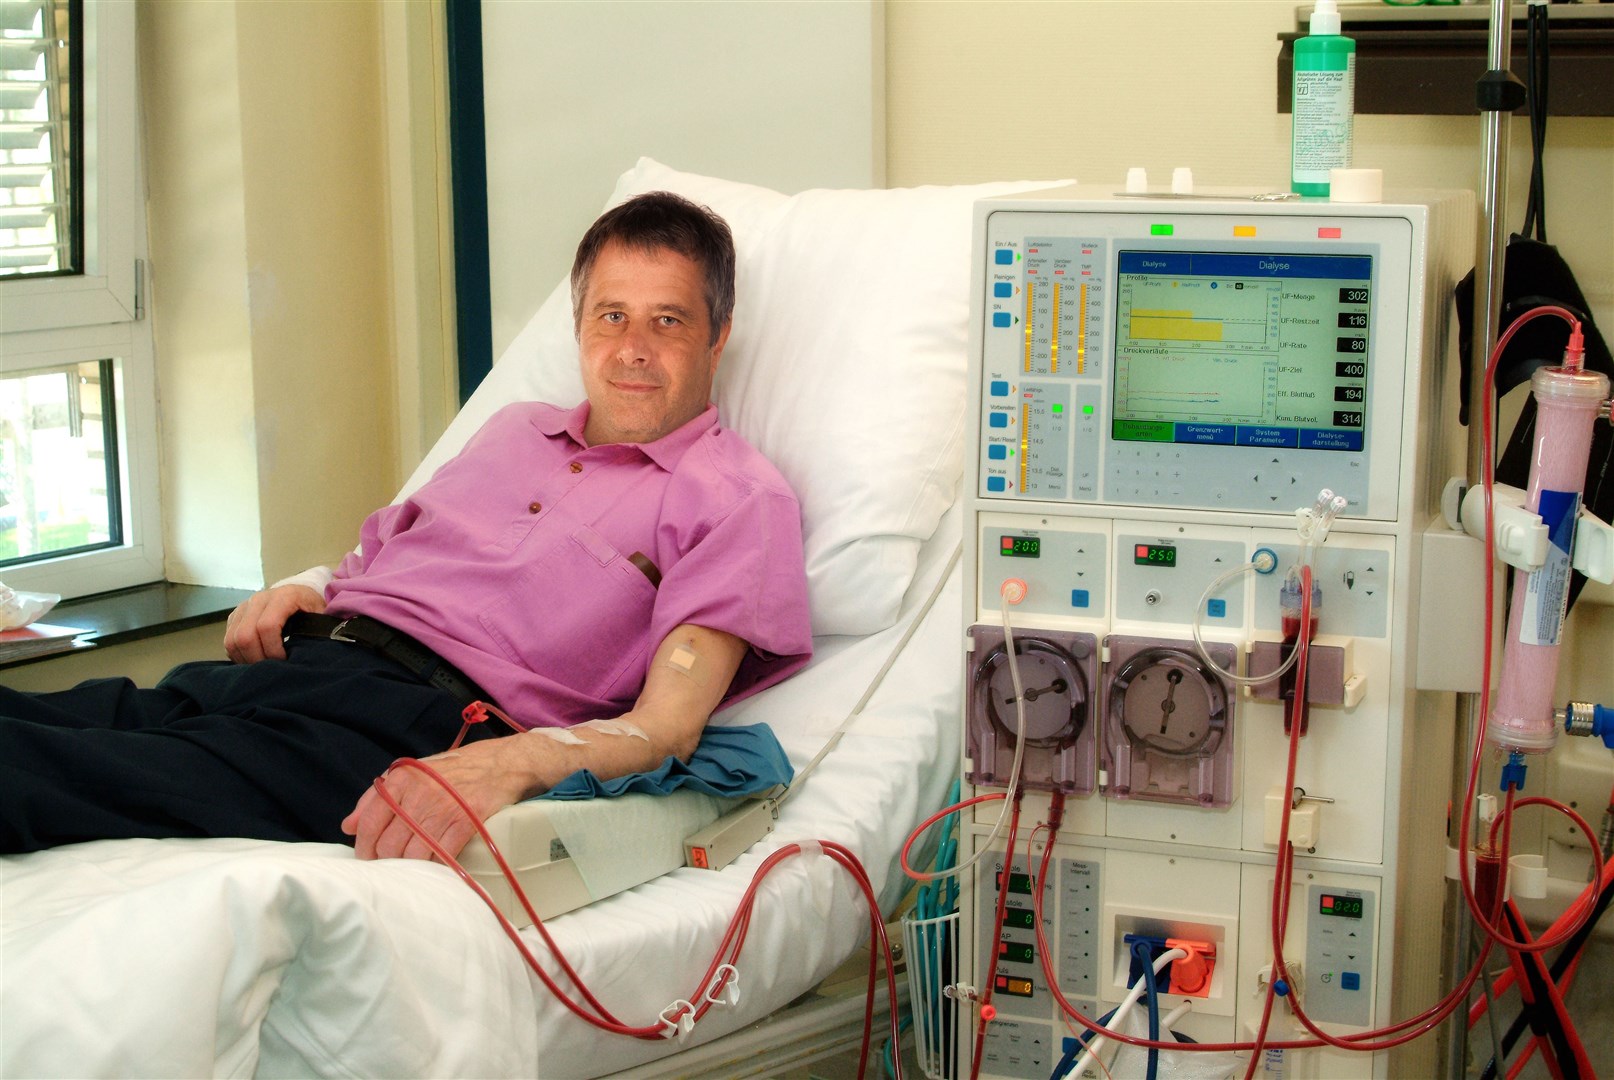 A patient on kidnesy dialysis.